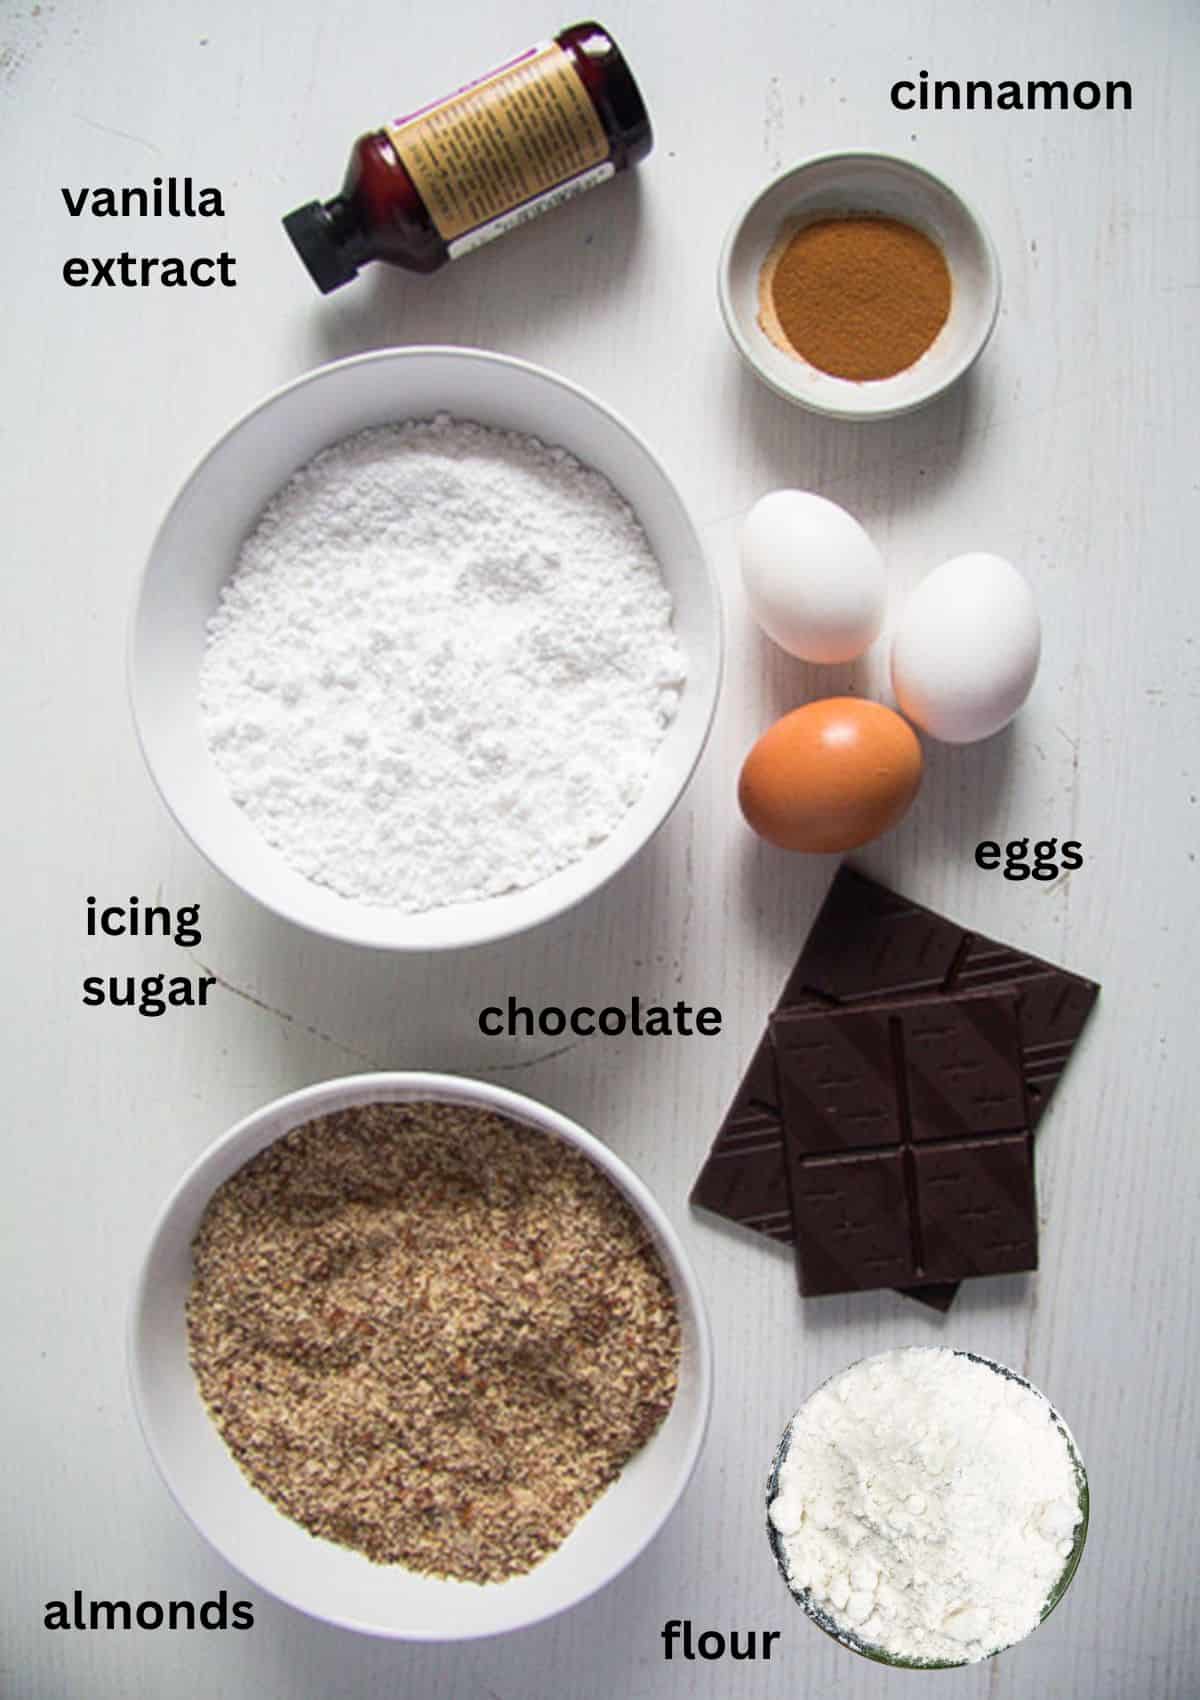 listed ingredients for making cookies with chocolate, almonds and icing sugar.